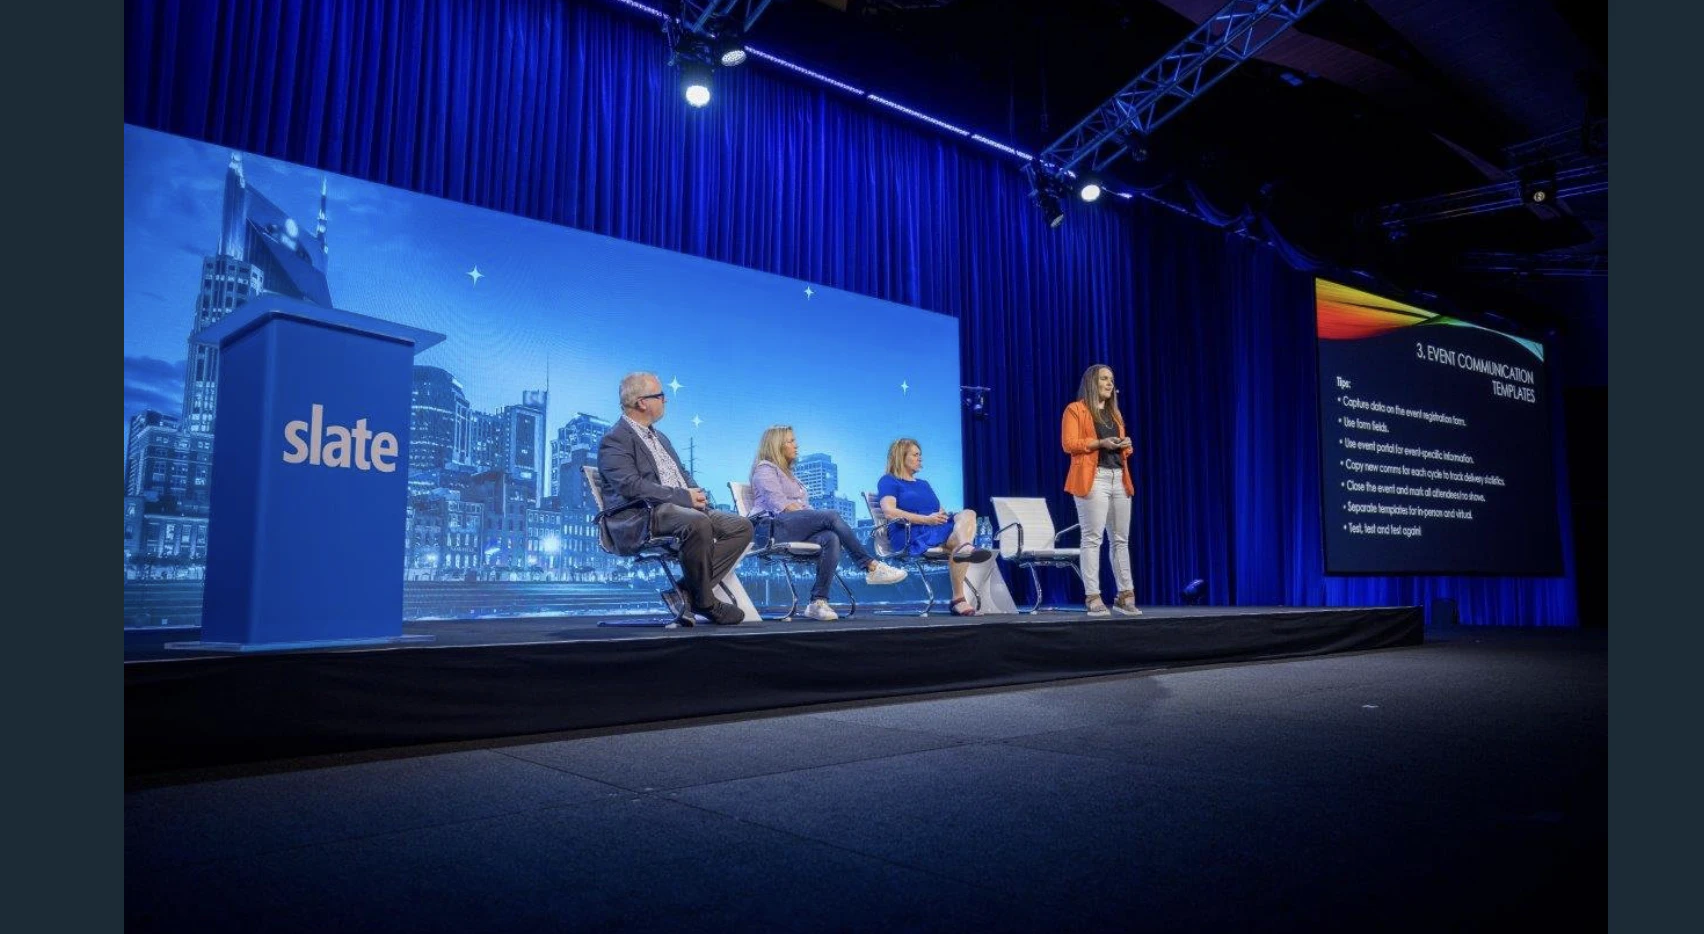 4 professionals stood on a Slate stage in front of a blue screen and Slate podium